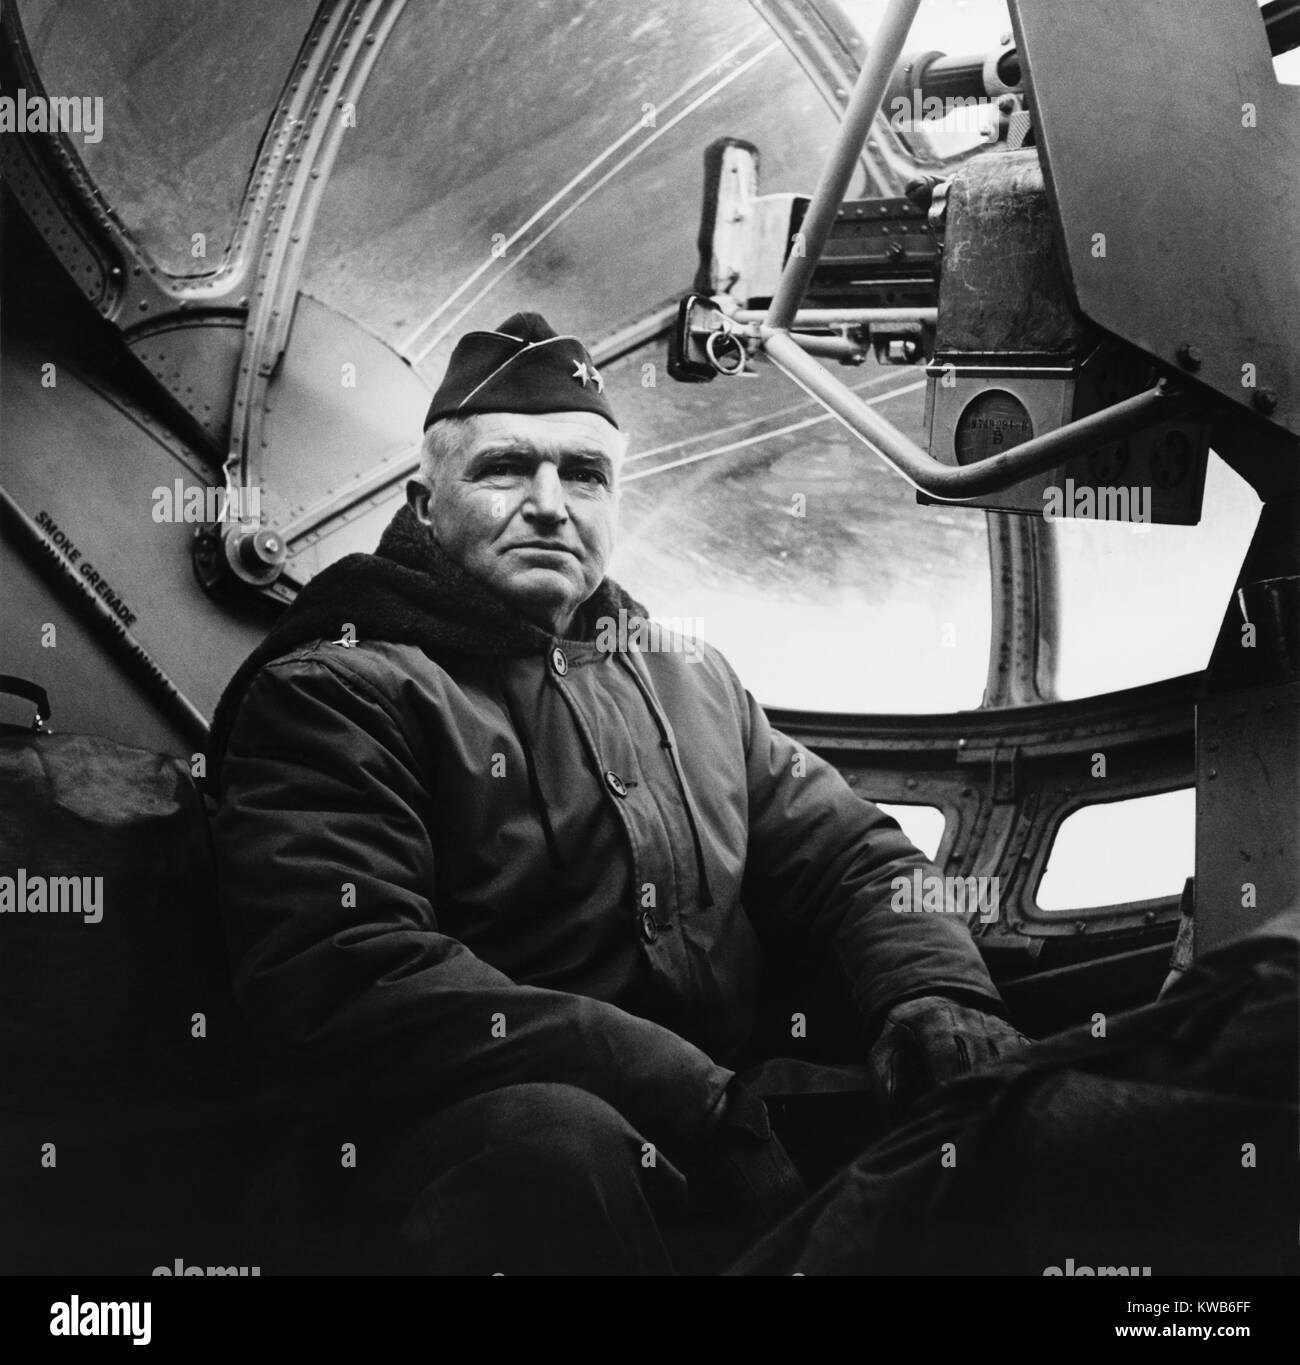 Maj. Gen. Simon Bolivar Buckner in a cockpit of an airplane, ca. 1942-45. He was the highest ranking U.S. officer killed in action in World War 2, during the Battle of Okinawa. (BSLOC 2014 8 138) Stock Photo